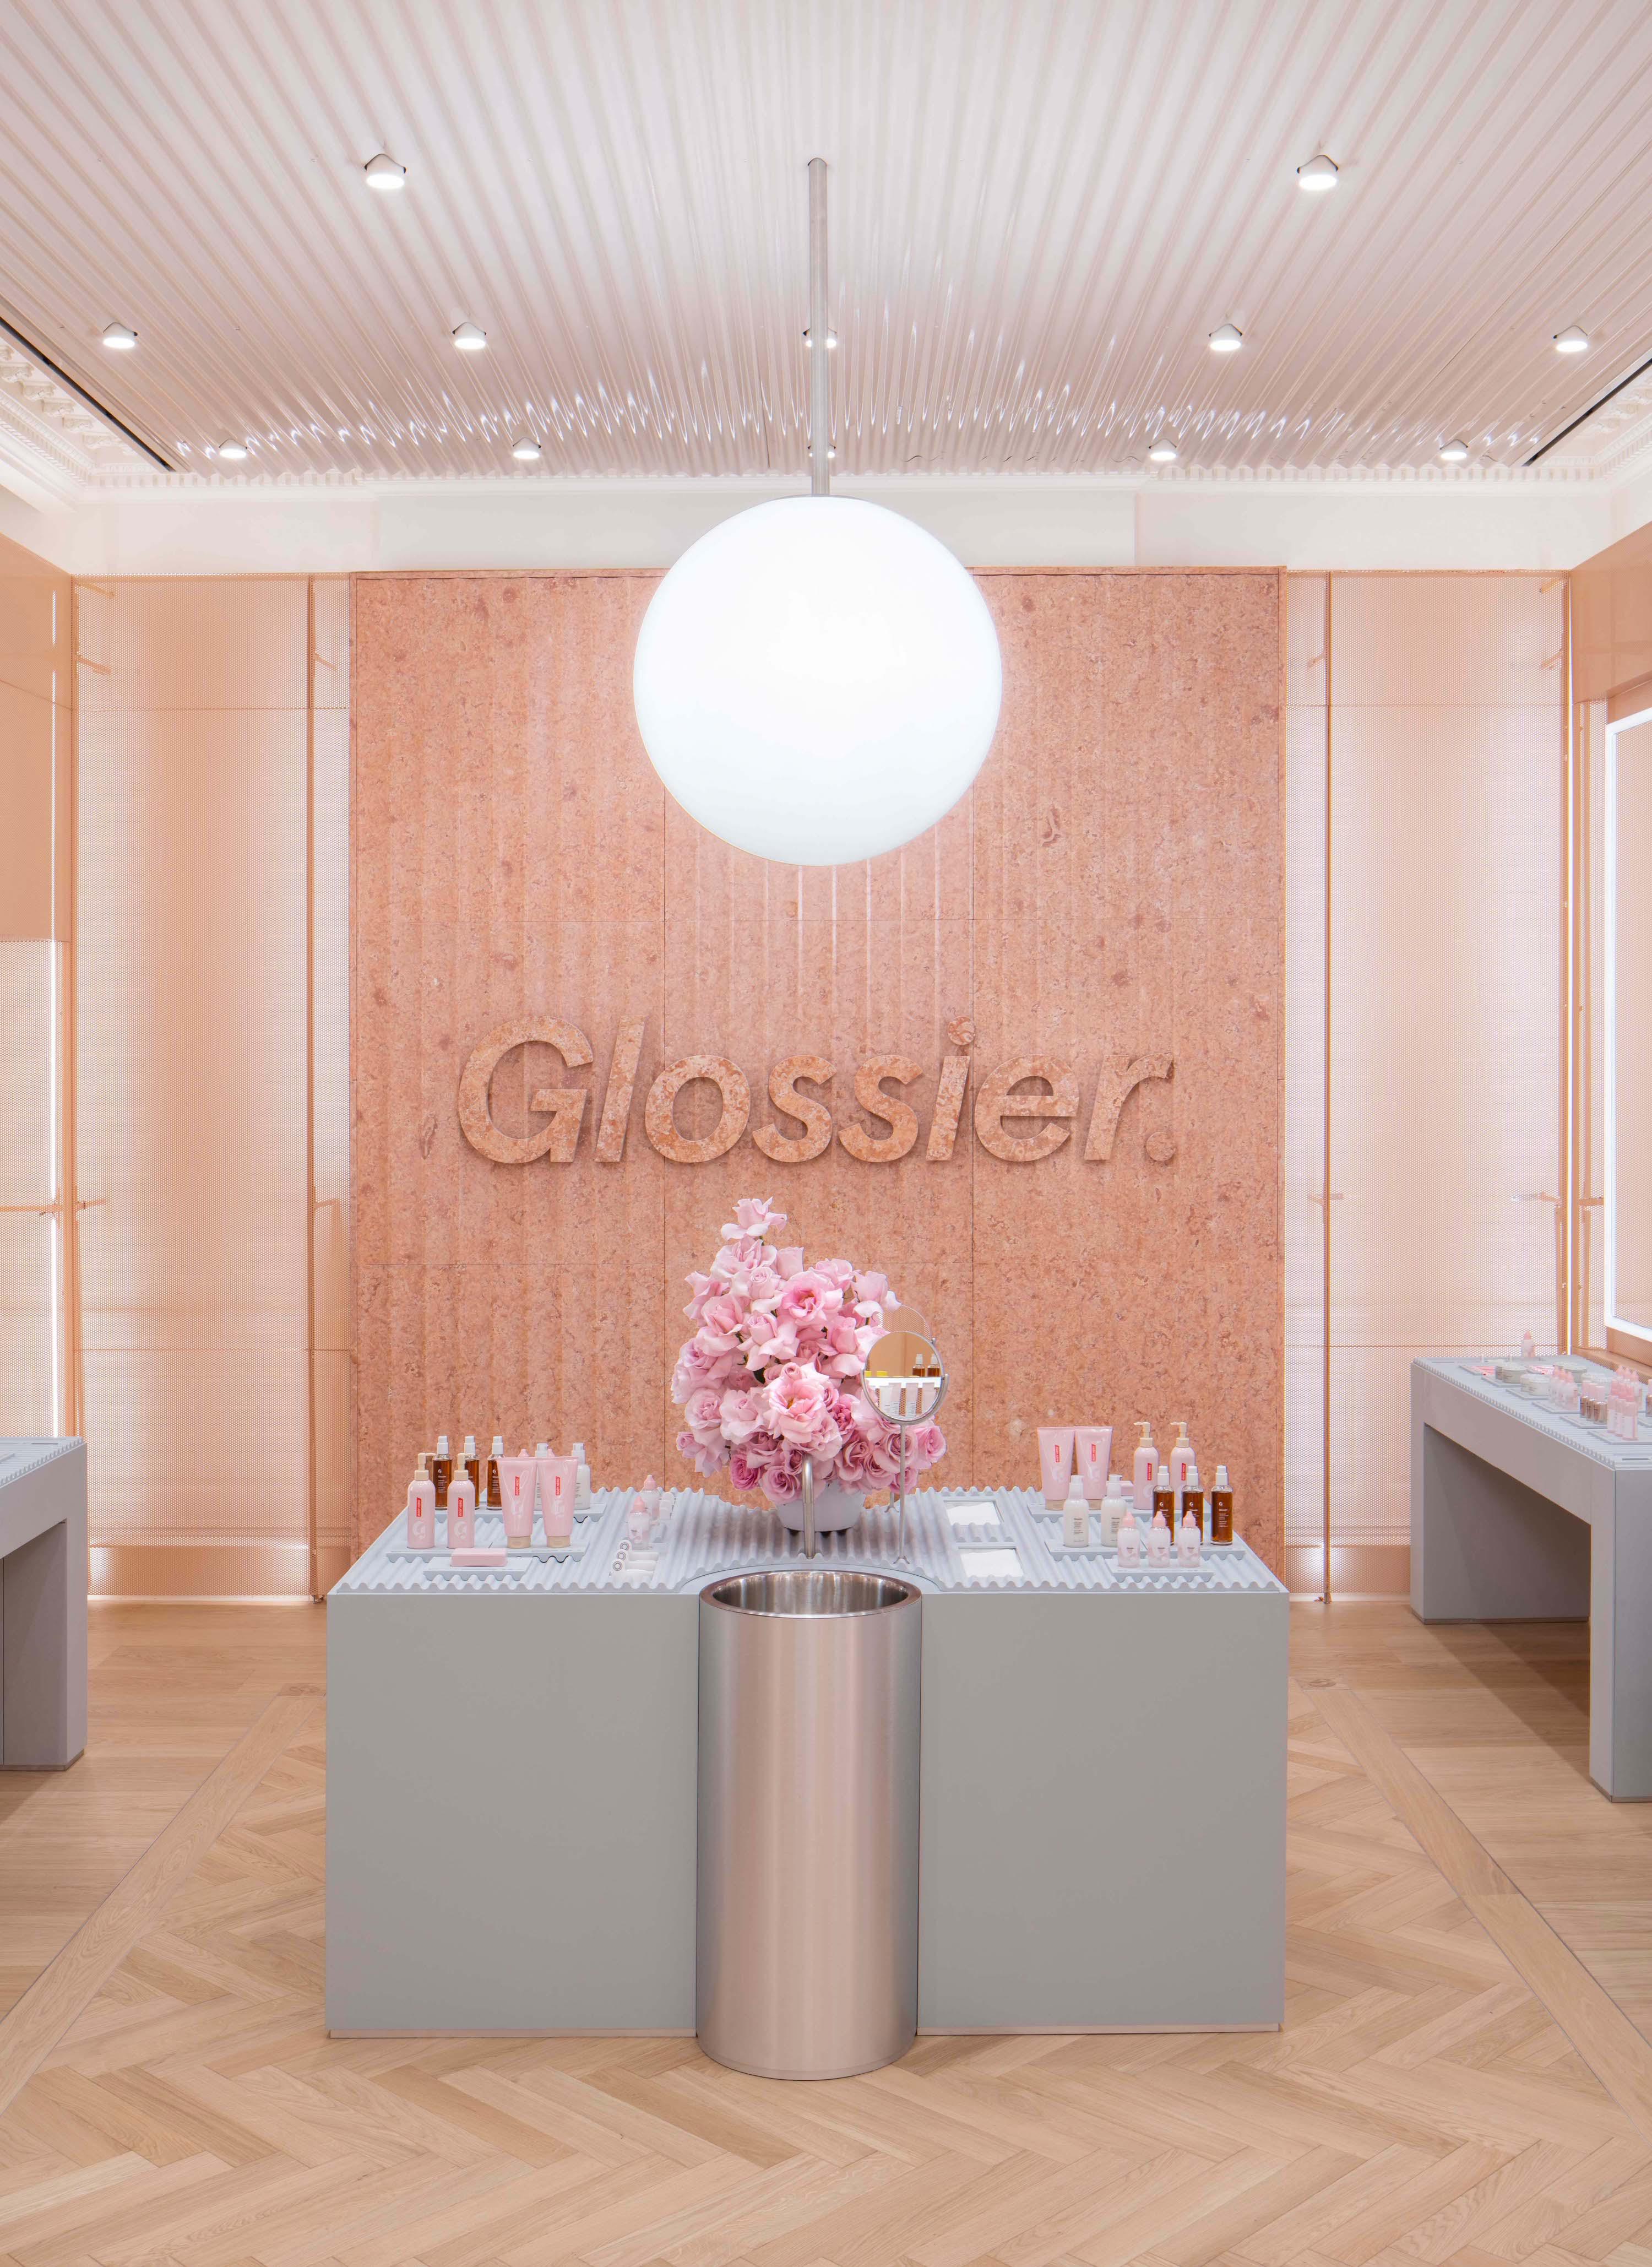 Images Glossier London